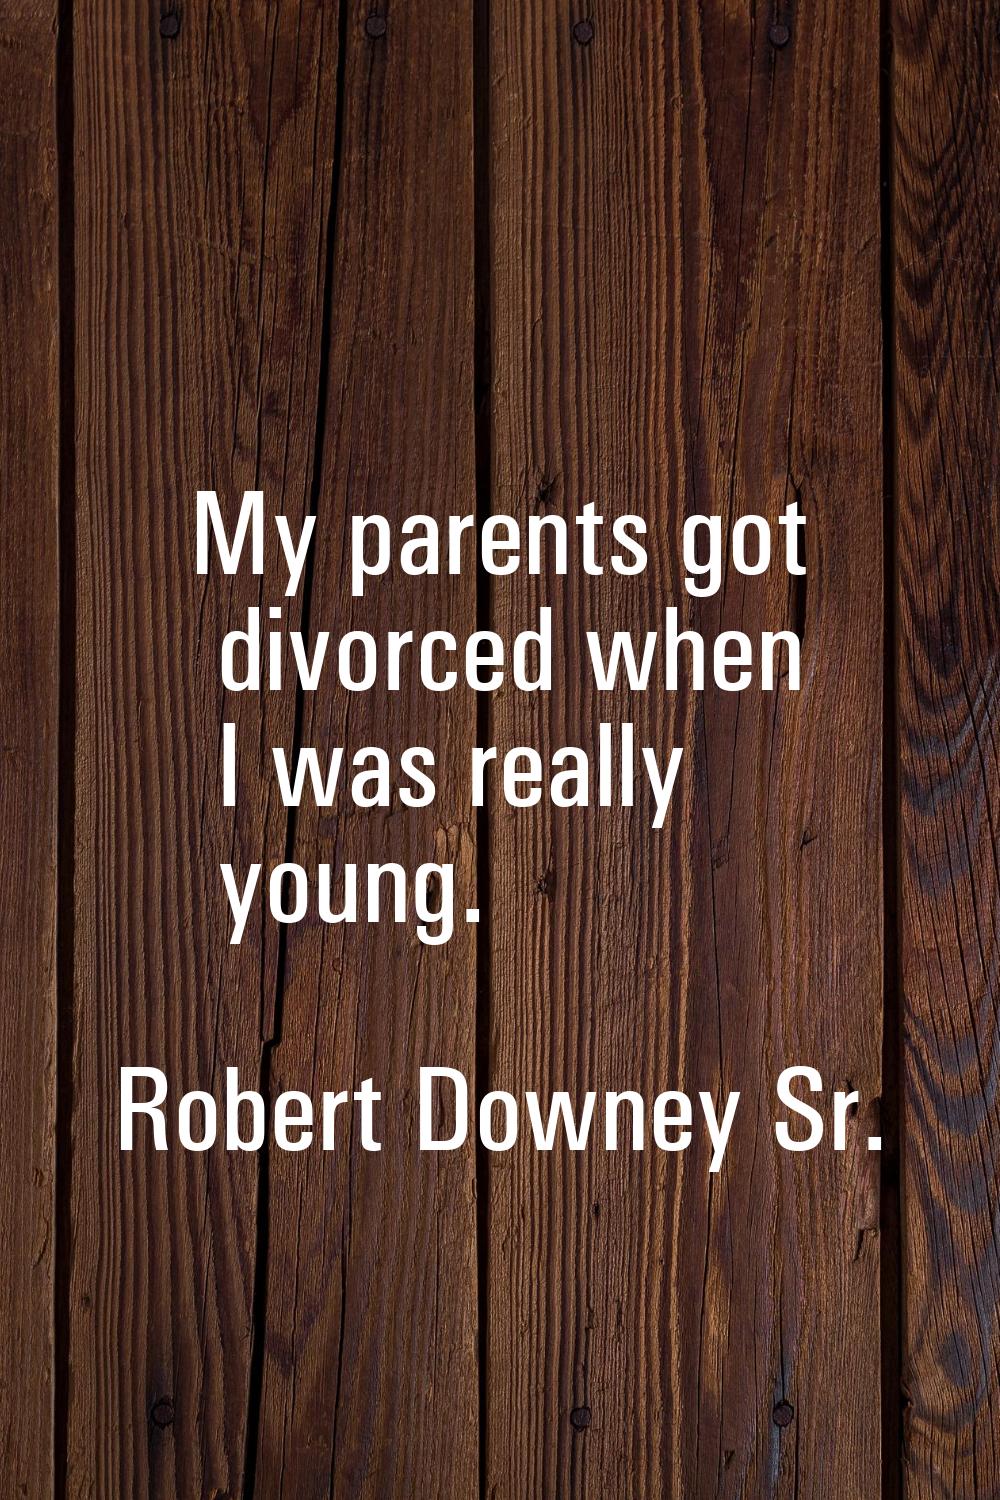 My parents got divorced when I was really young.